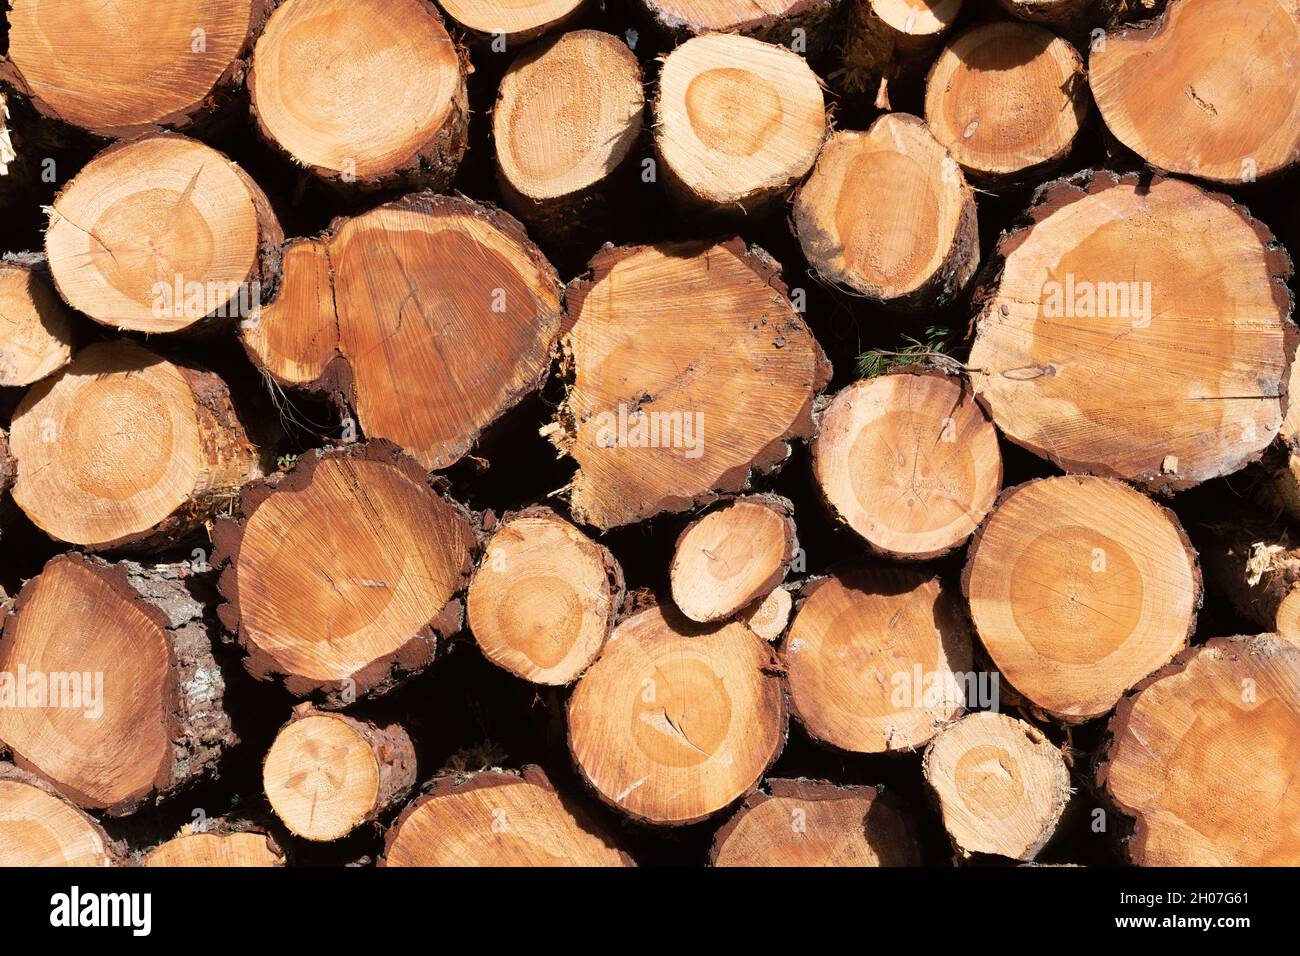 A Stack of Scots Pine (Pinus Sylvestris) Logs Showing the Timber in Cross-Section Stock Photo